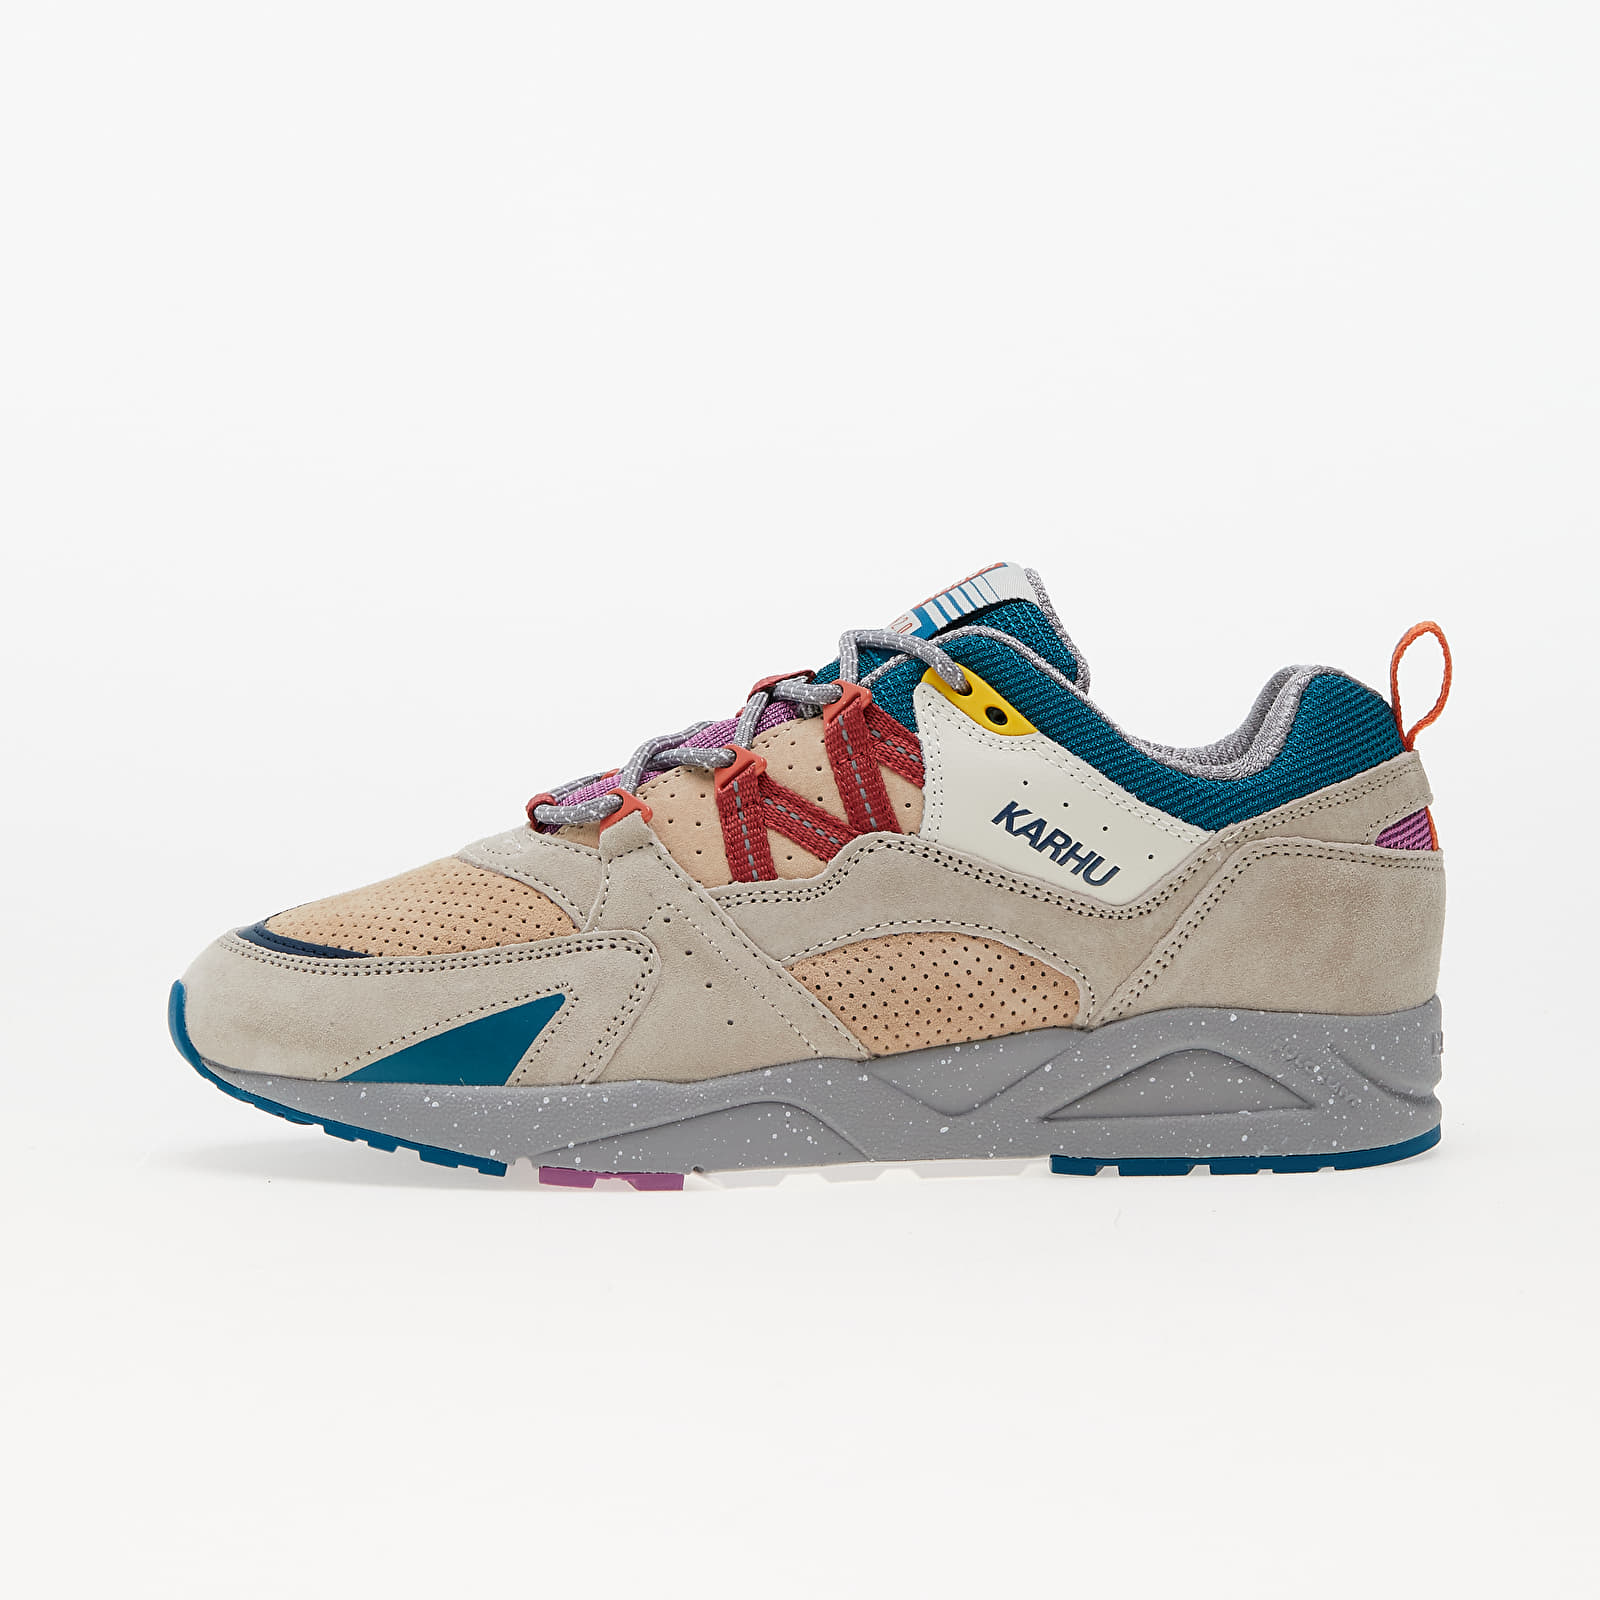 Chaussures et baskets homme Karhu Fusion 2.0 Silver Lining/ Mineral Red